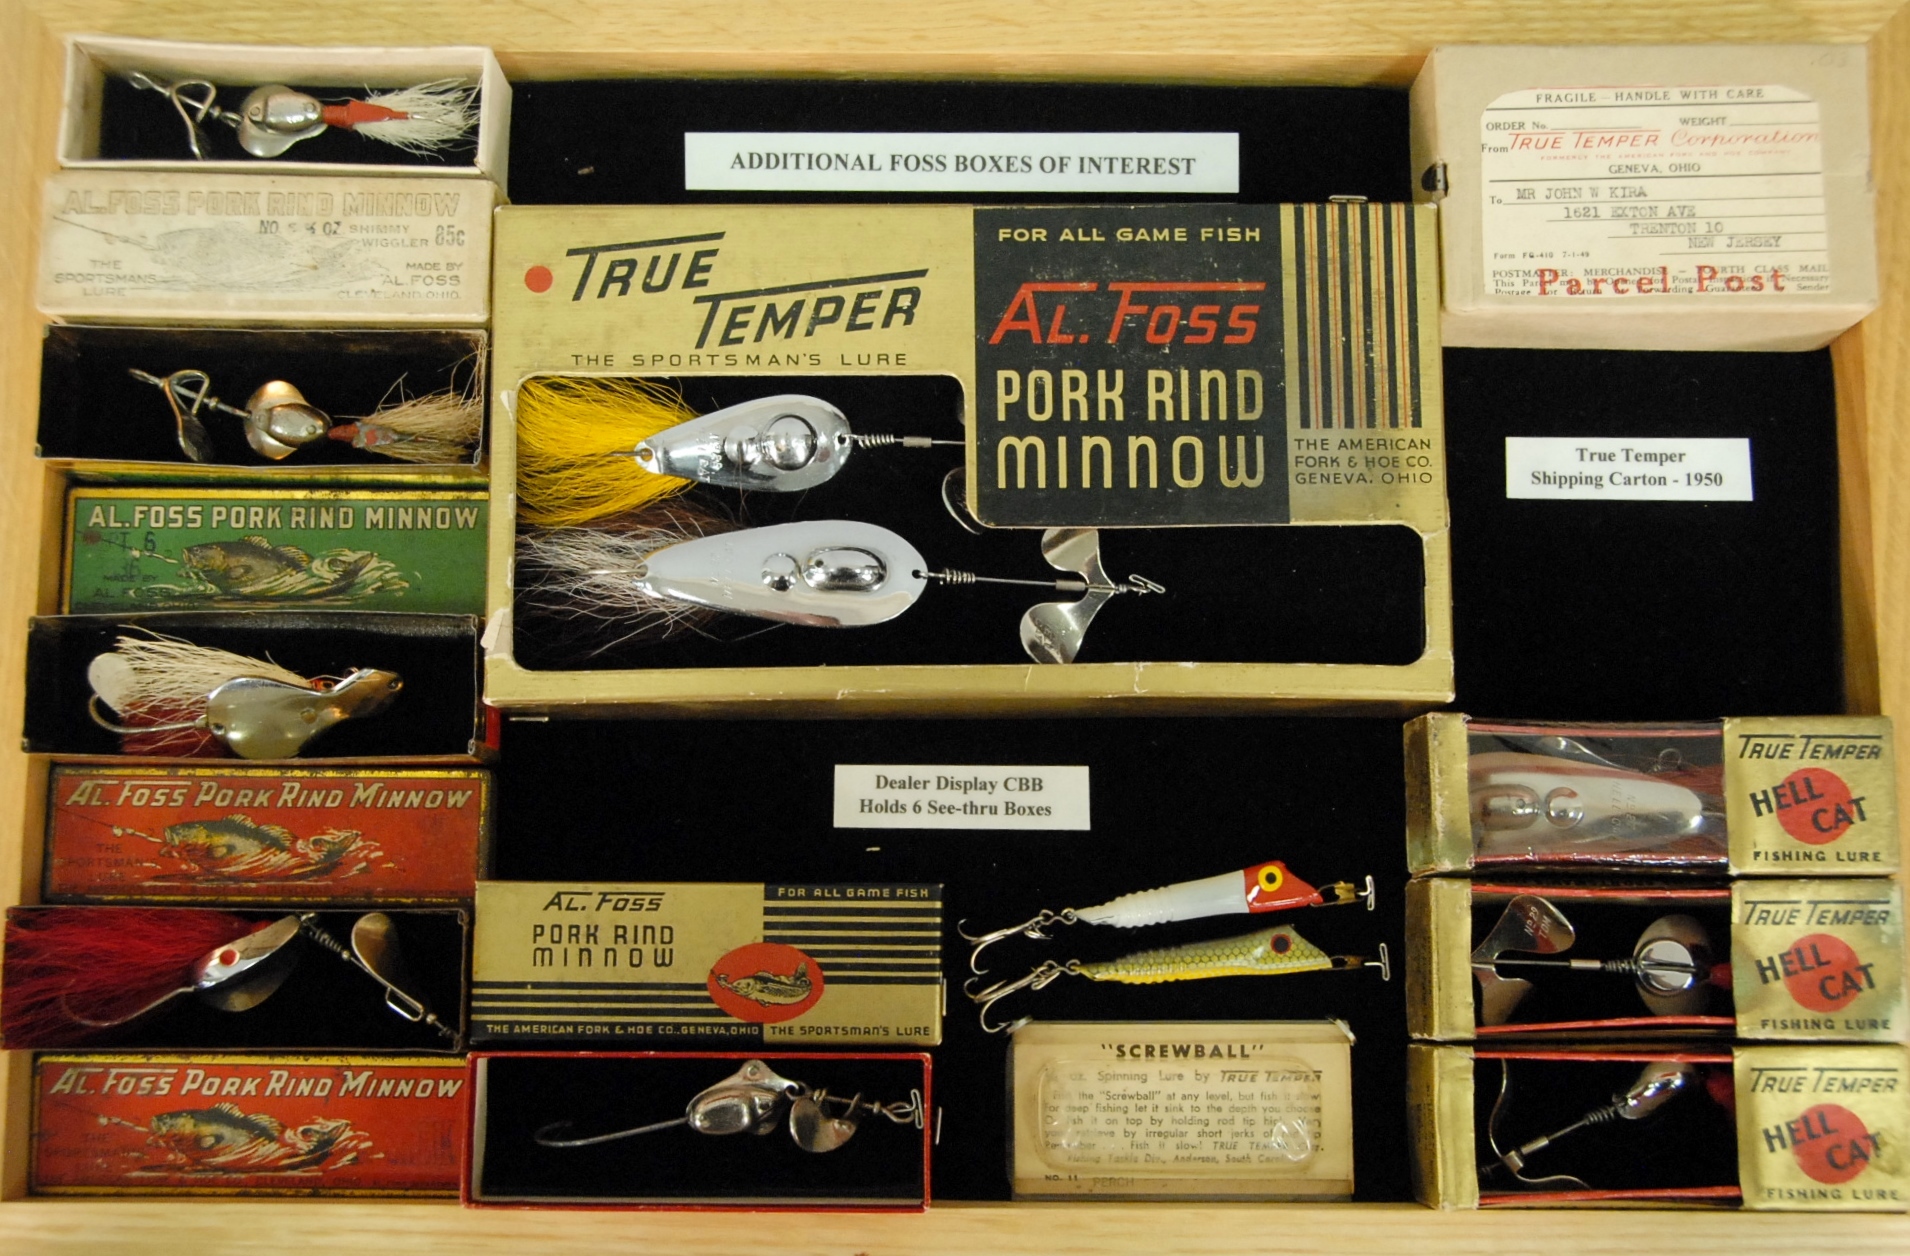 Lot 191: Collection of Al Foss Pork Rind Minnow lures with